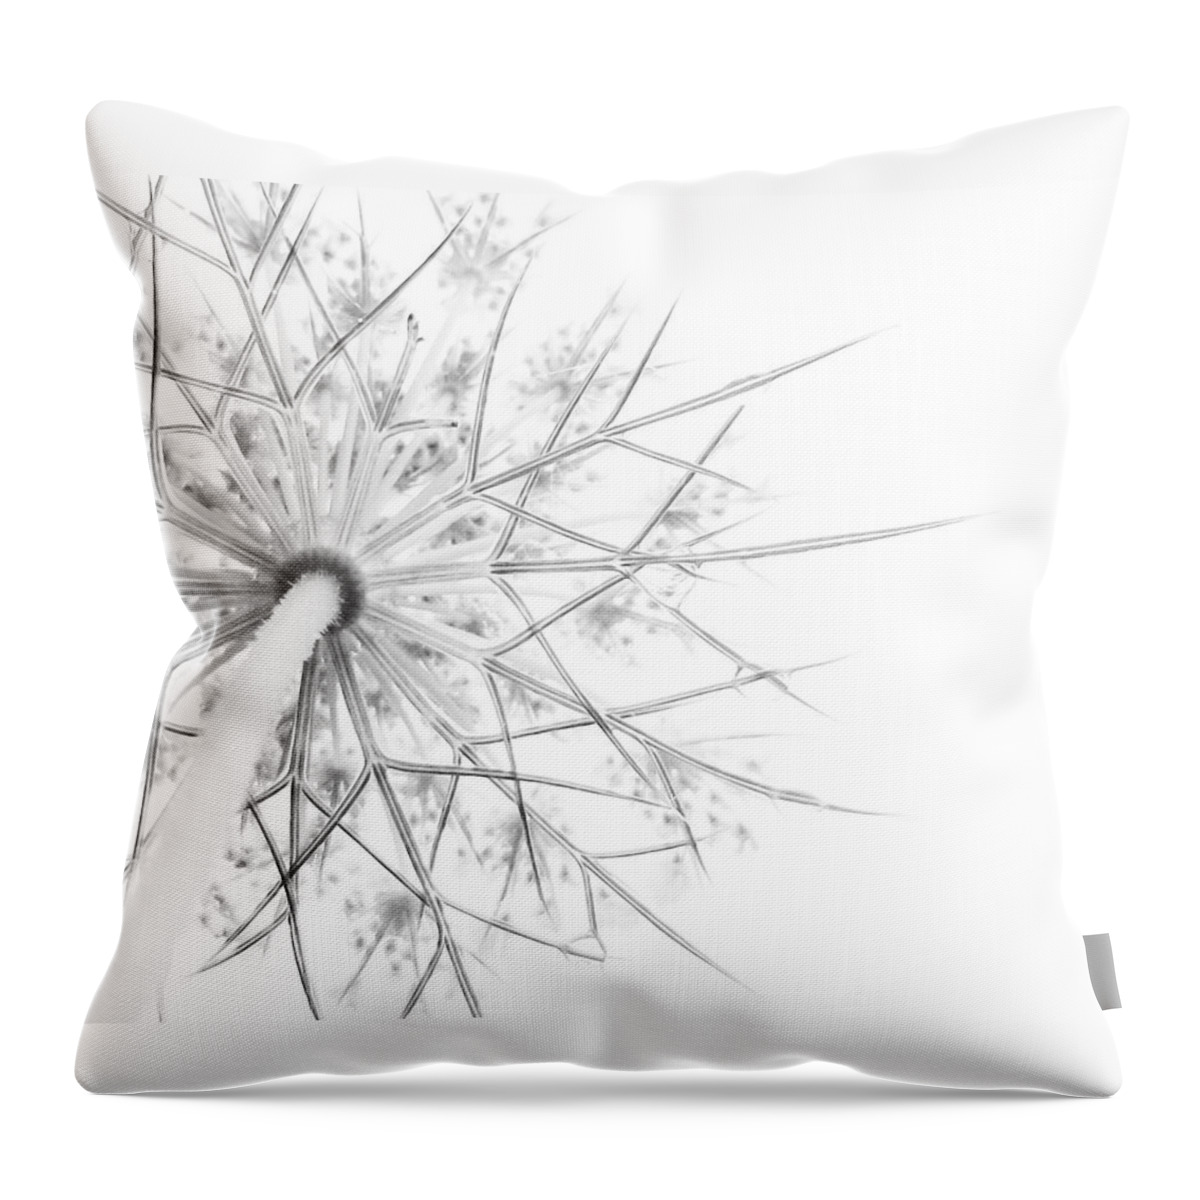 Queen Anne's Lace Throw Pillow featuring the photograph Summer Snow by Holly Ross